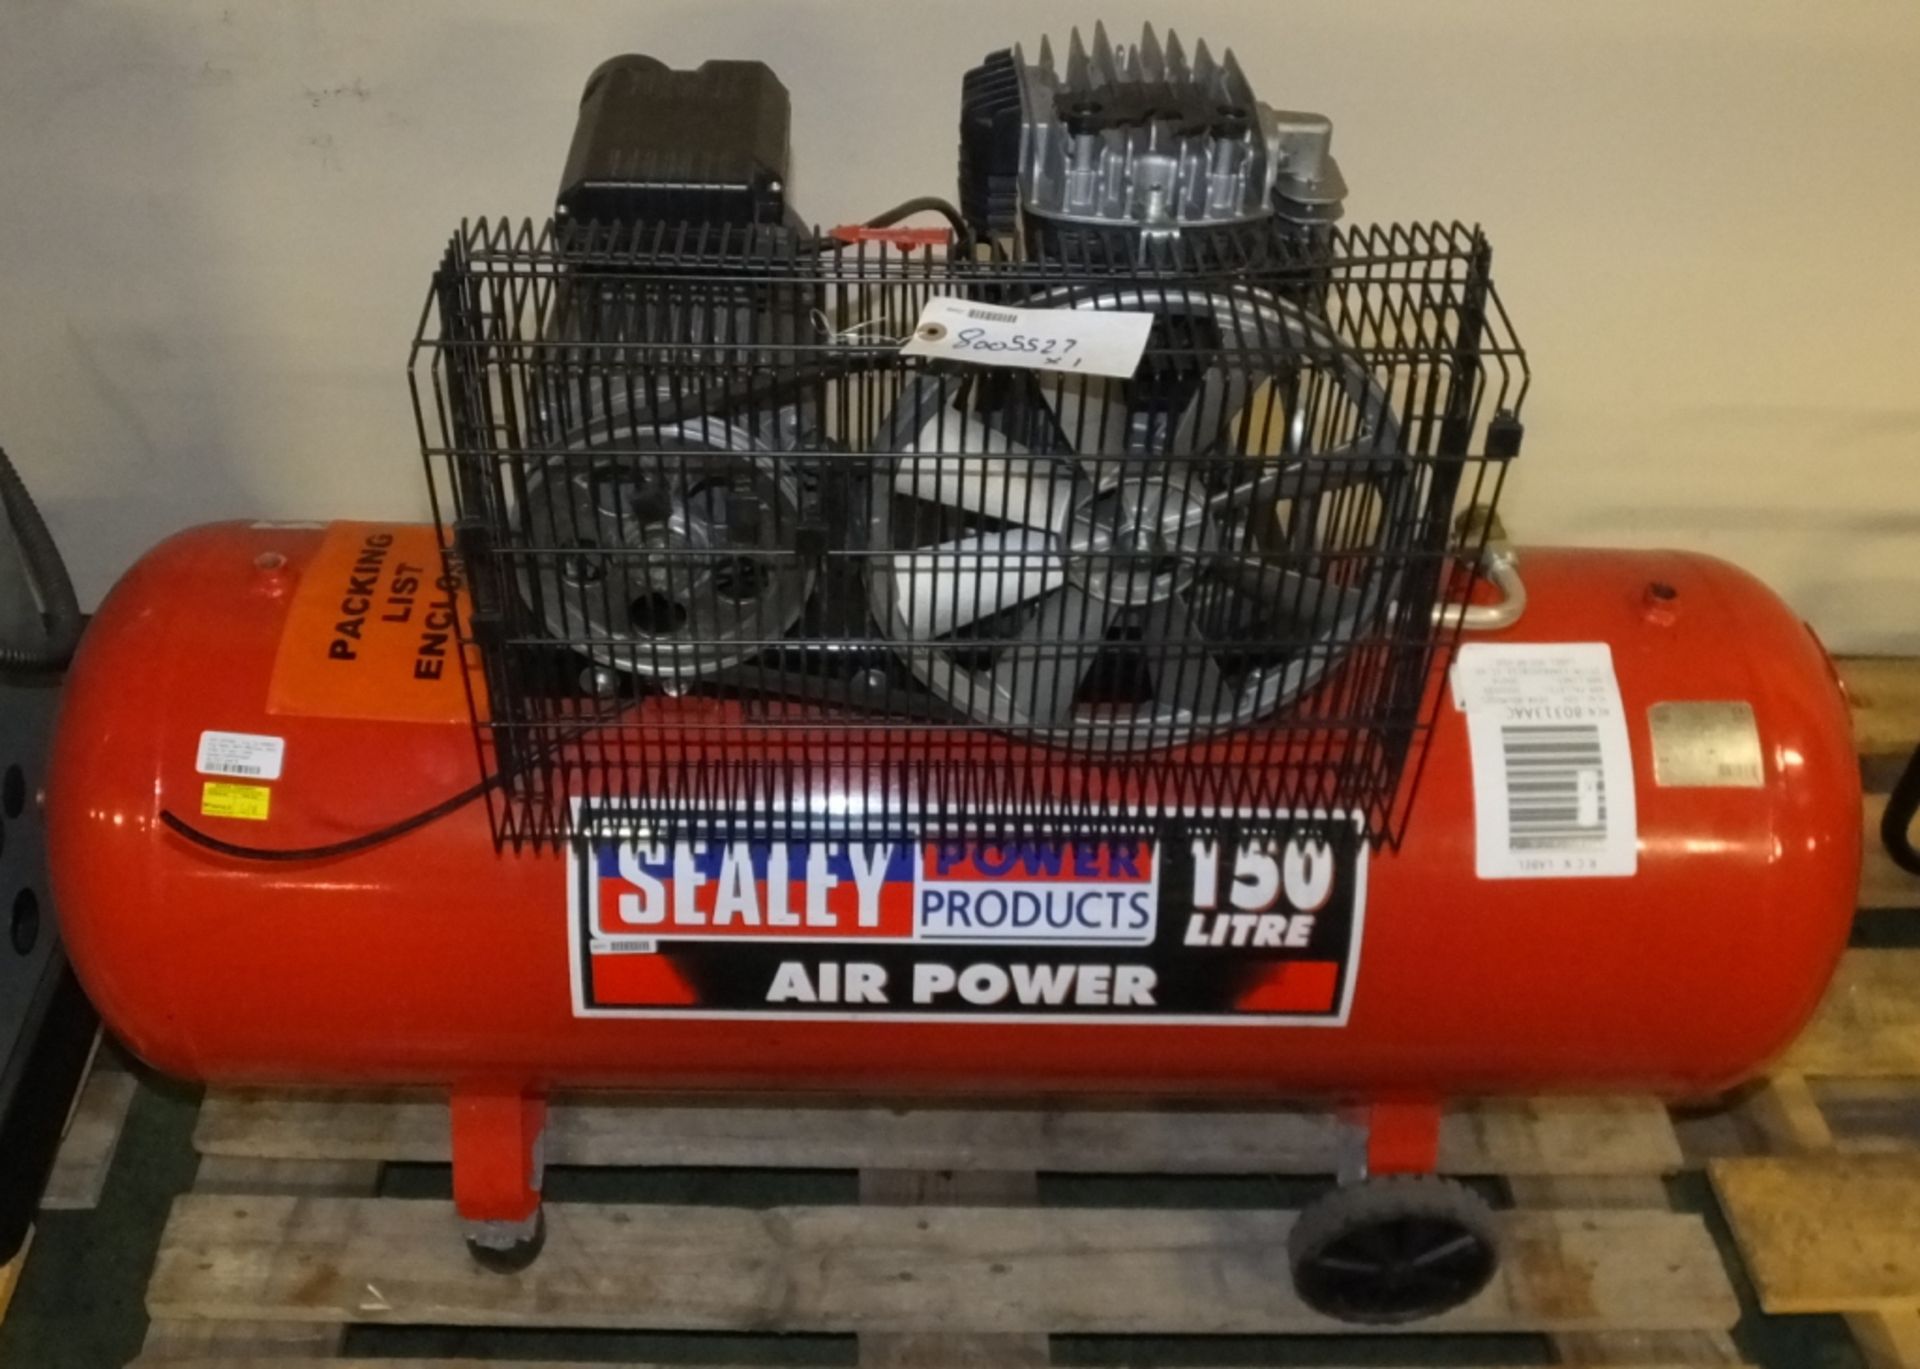 Sealey Power Products Air Power 150LTR Compressor